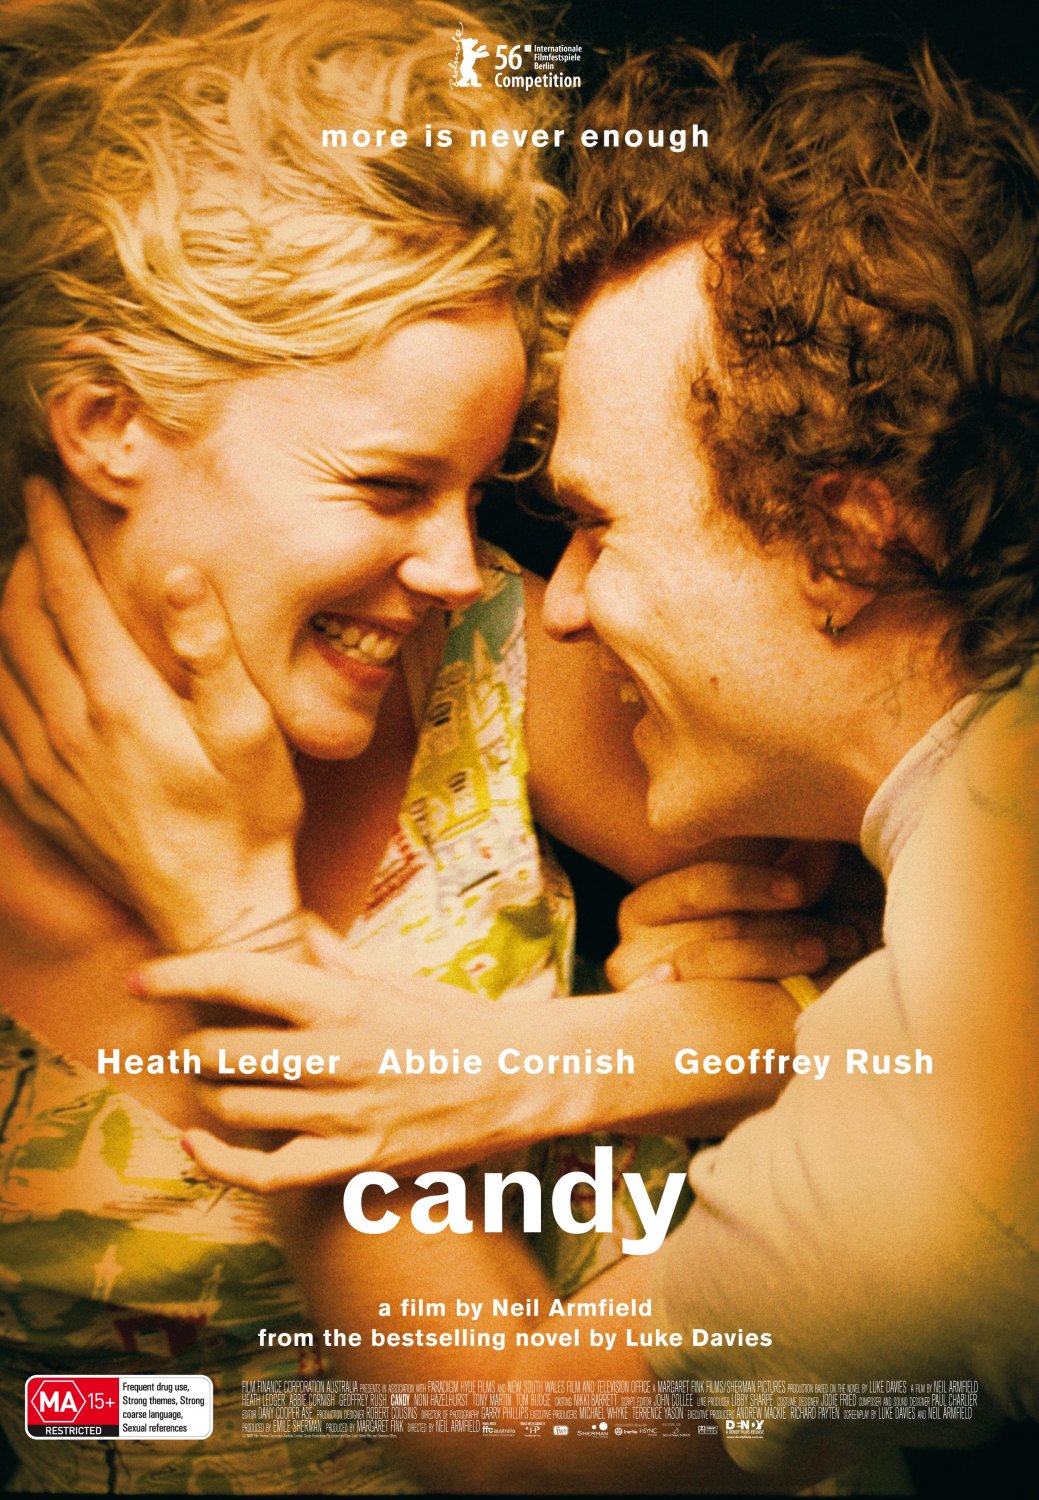 Candy (4 of 6) Extra Large Movie Poster Image IMP Awards